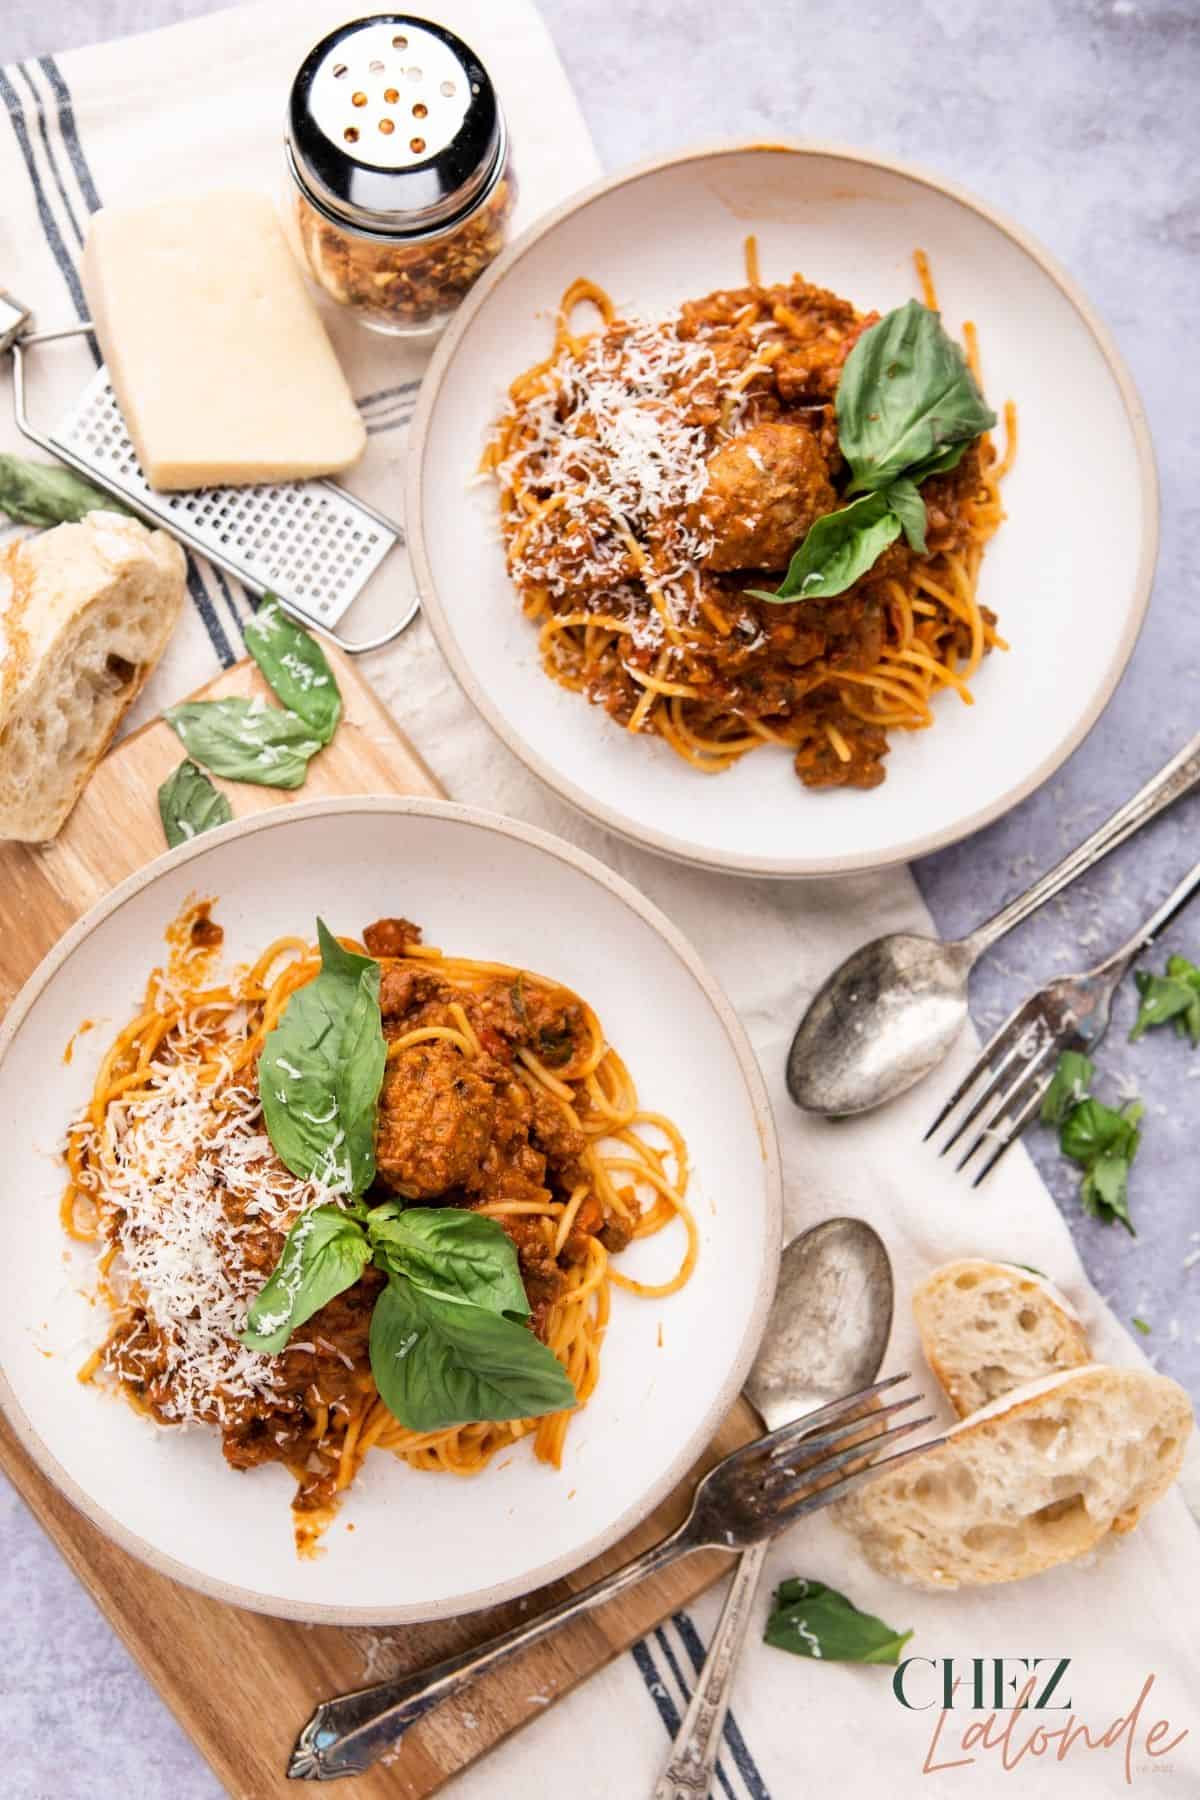 Two plates of spaghetti with meat sauce on  round white plates.  They are garnished with grated  with parmigiano-Reggiano cheese and fresh basil. There are slices of french baguette, a big wedge of cheese on the top left corner with a jar of red chili flakes. 